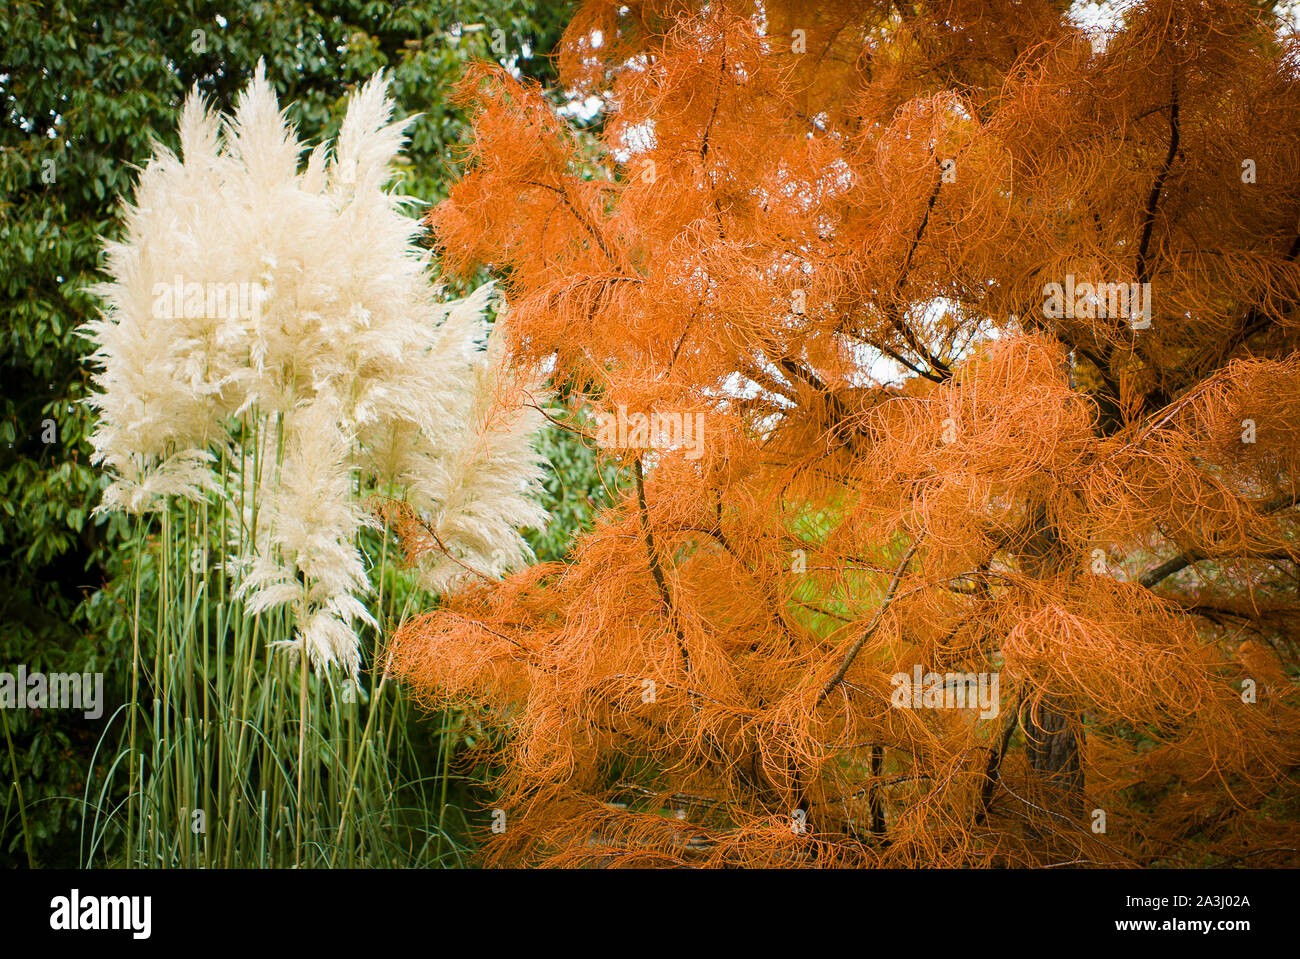 Contrasting displays of two distinctly different plants in Bath Botaniic gardens. Autumn foliage of a Swamp Cypress and creamy plumes of pampas grass Stock Photo